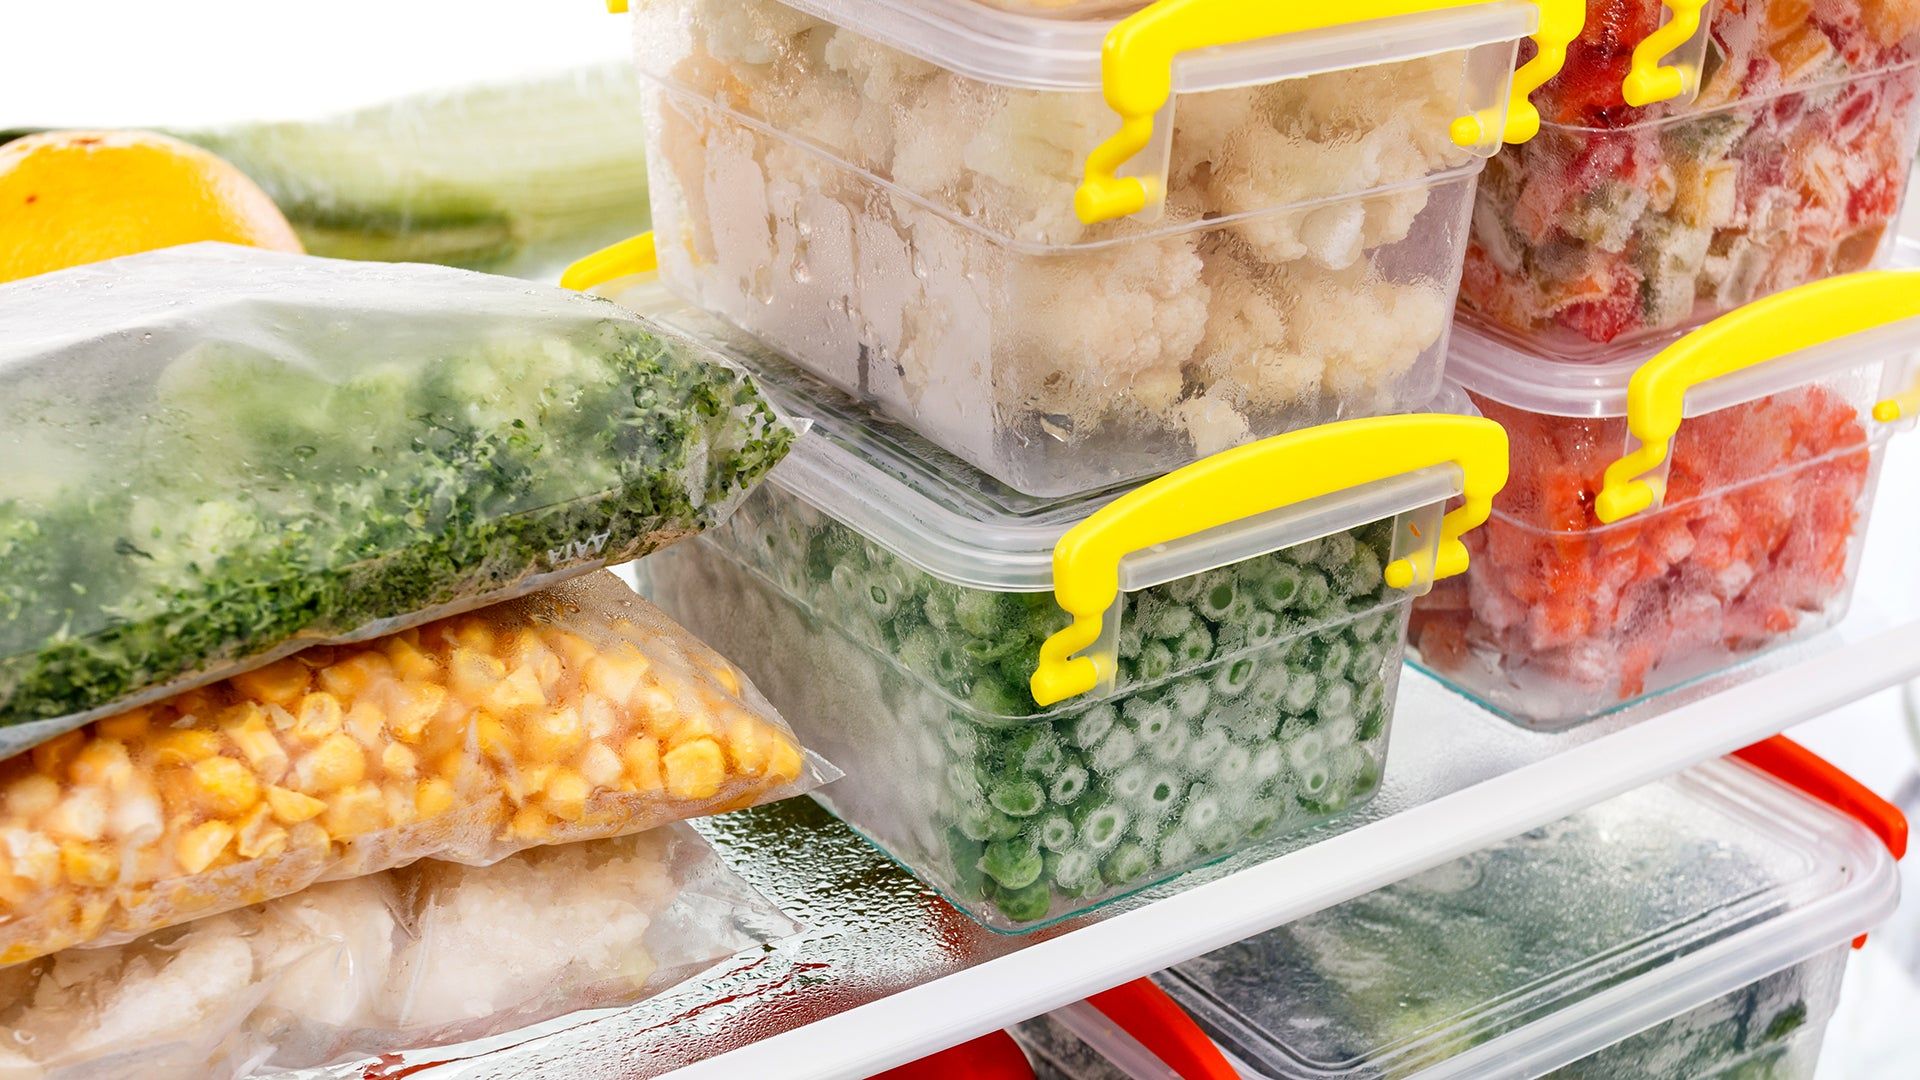 How To Pack and Store Food In The Freezer and Avoid Freezer Burn